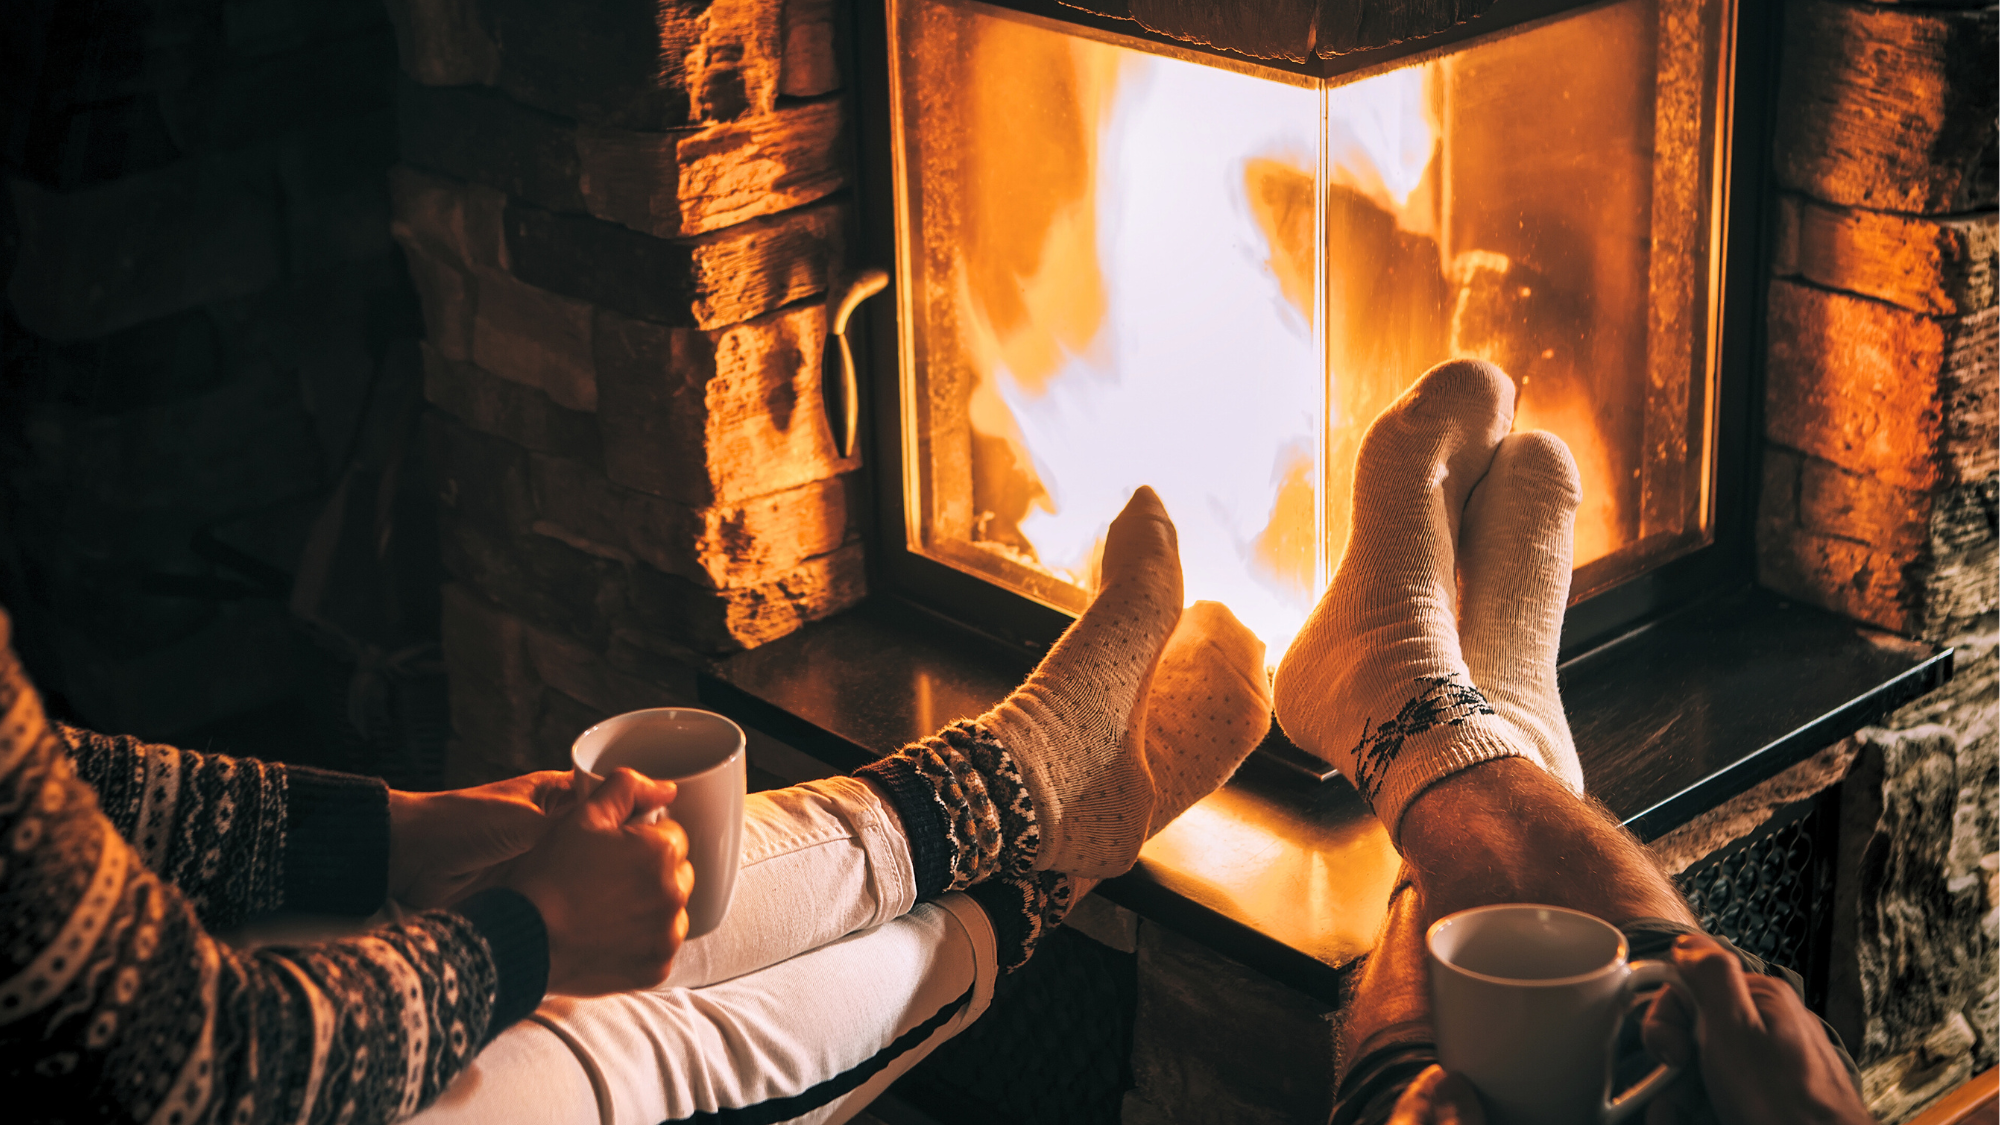 Warm Up Your Winter with Propane Fireplaces